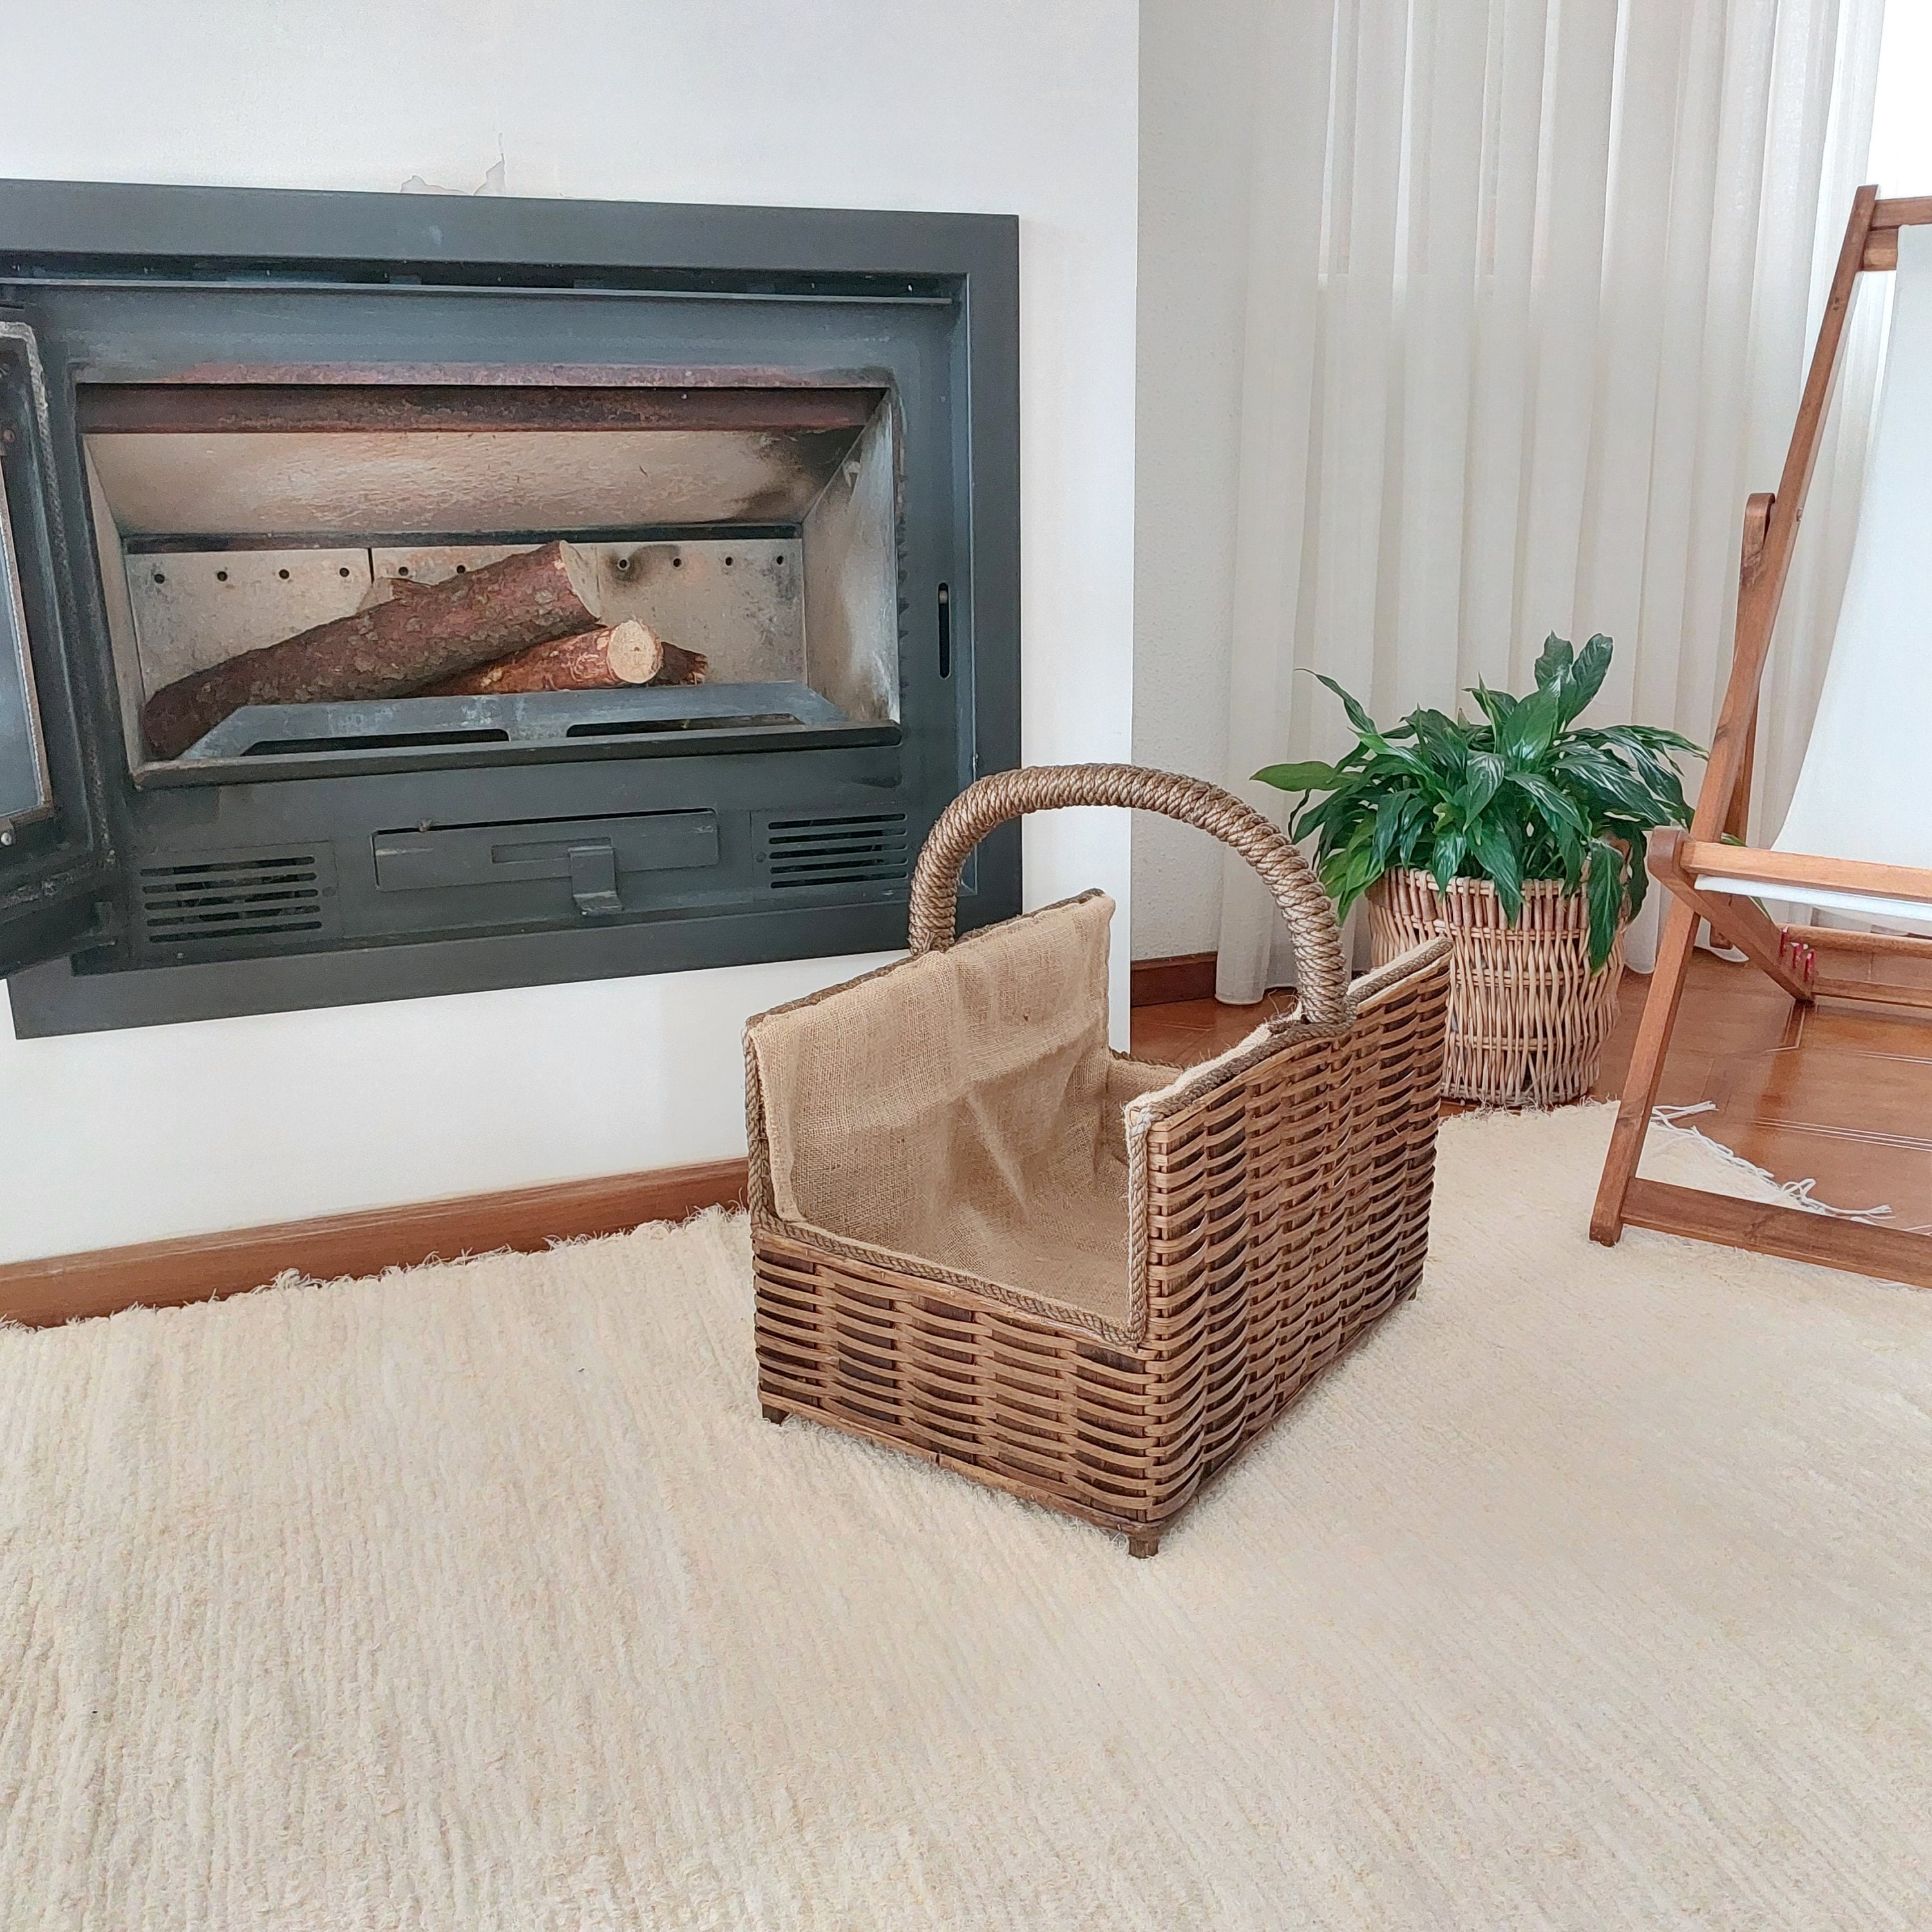 Sturdy Felt Firewood Basket With Wooden Side Handles and Stag